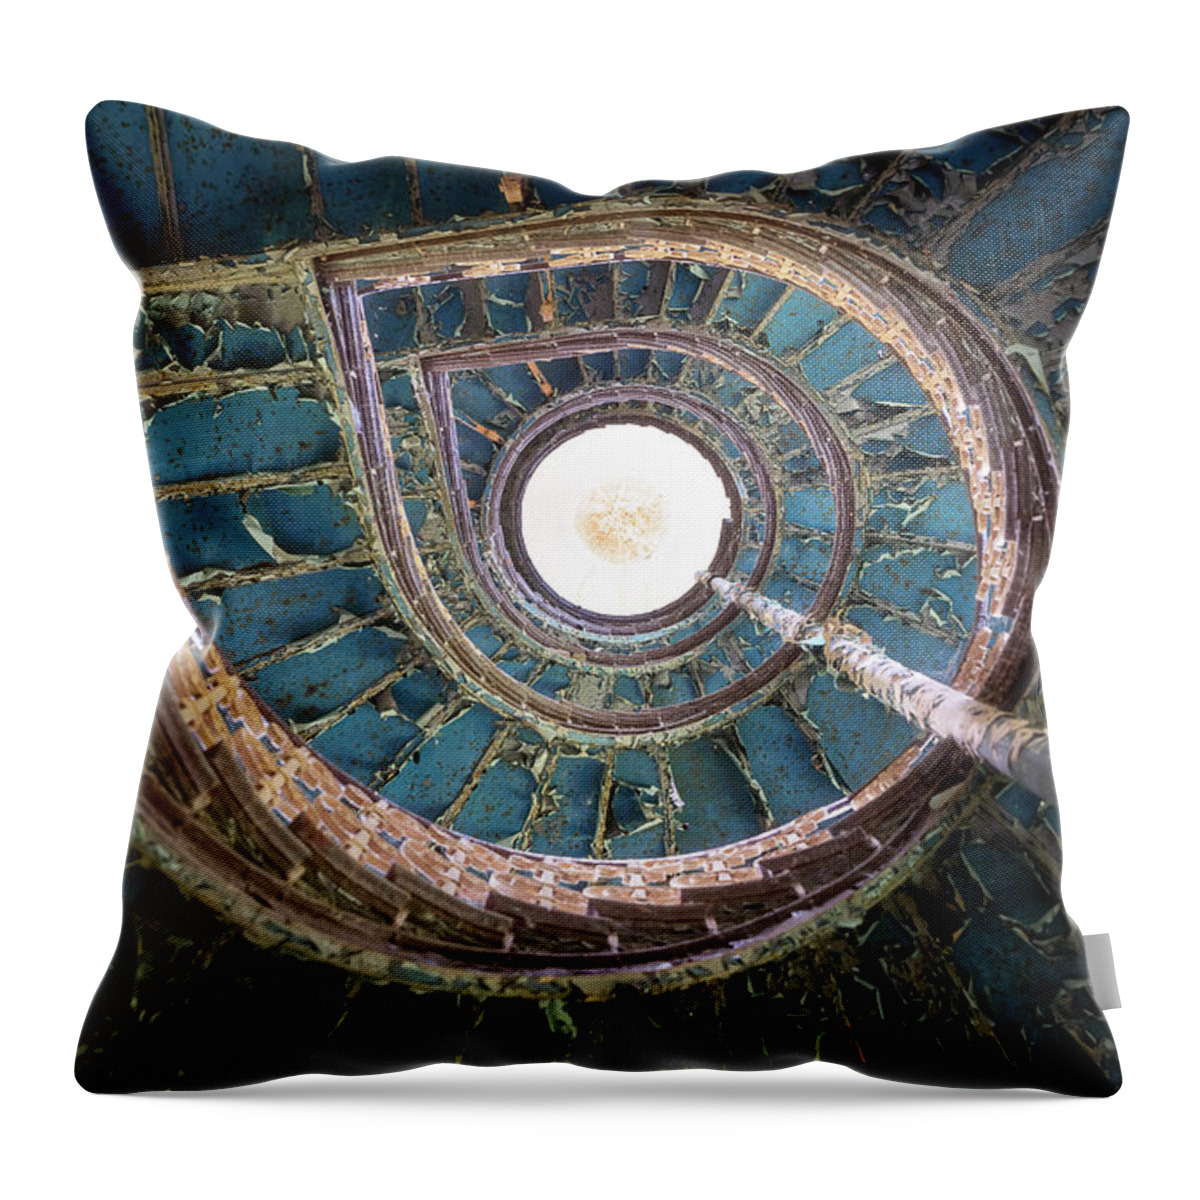 Urban Throw Pillow featuring the photograph Abandoned Blue Stairs by Roman Robroek